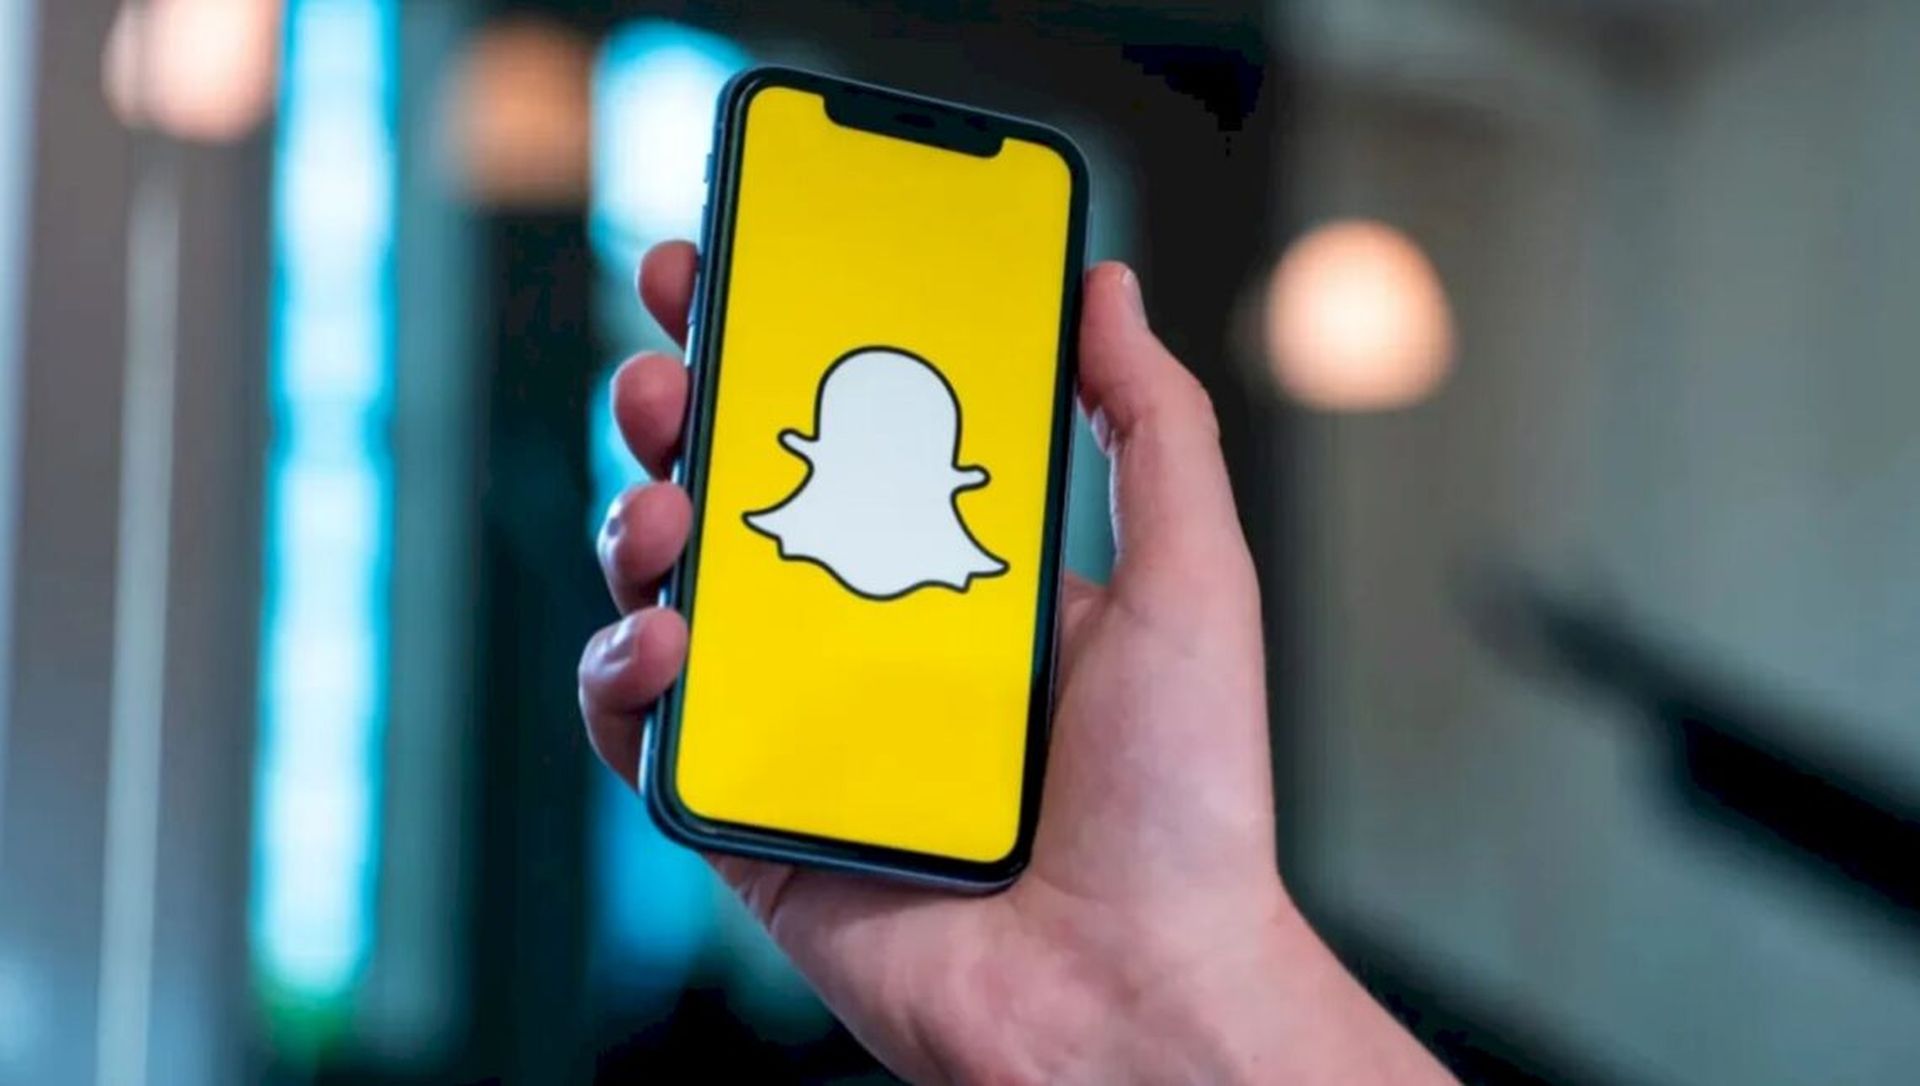 When we think of the end of a year, Wrapped content of apps comes to mind and Snapchat is not an exception. Sadly, Snapchat Year in Review 2022 not working...